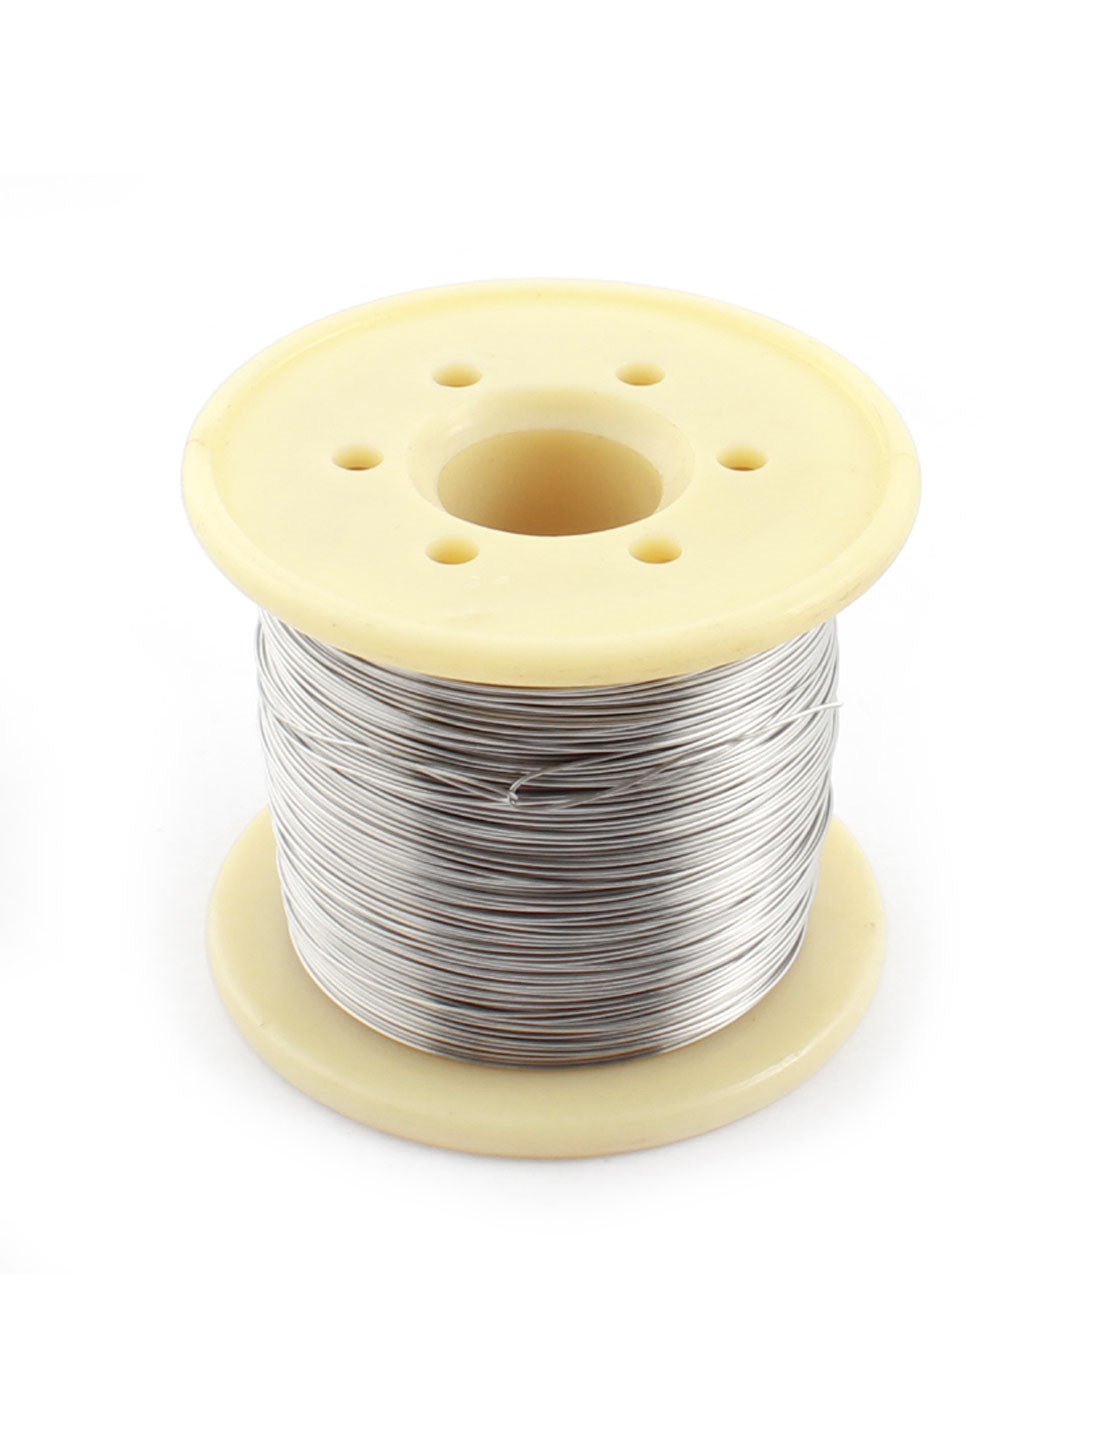 uxcell Uxcell 50meter 165ft Length 0.4mm Diameter AWG26 Resistance Heating Coils Resistor Wire for Heater